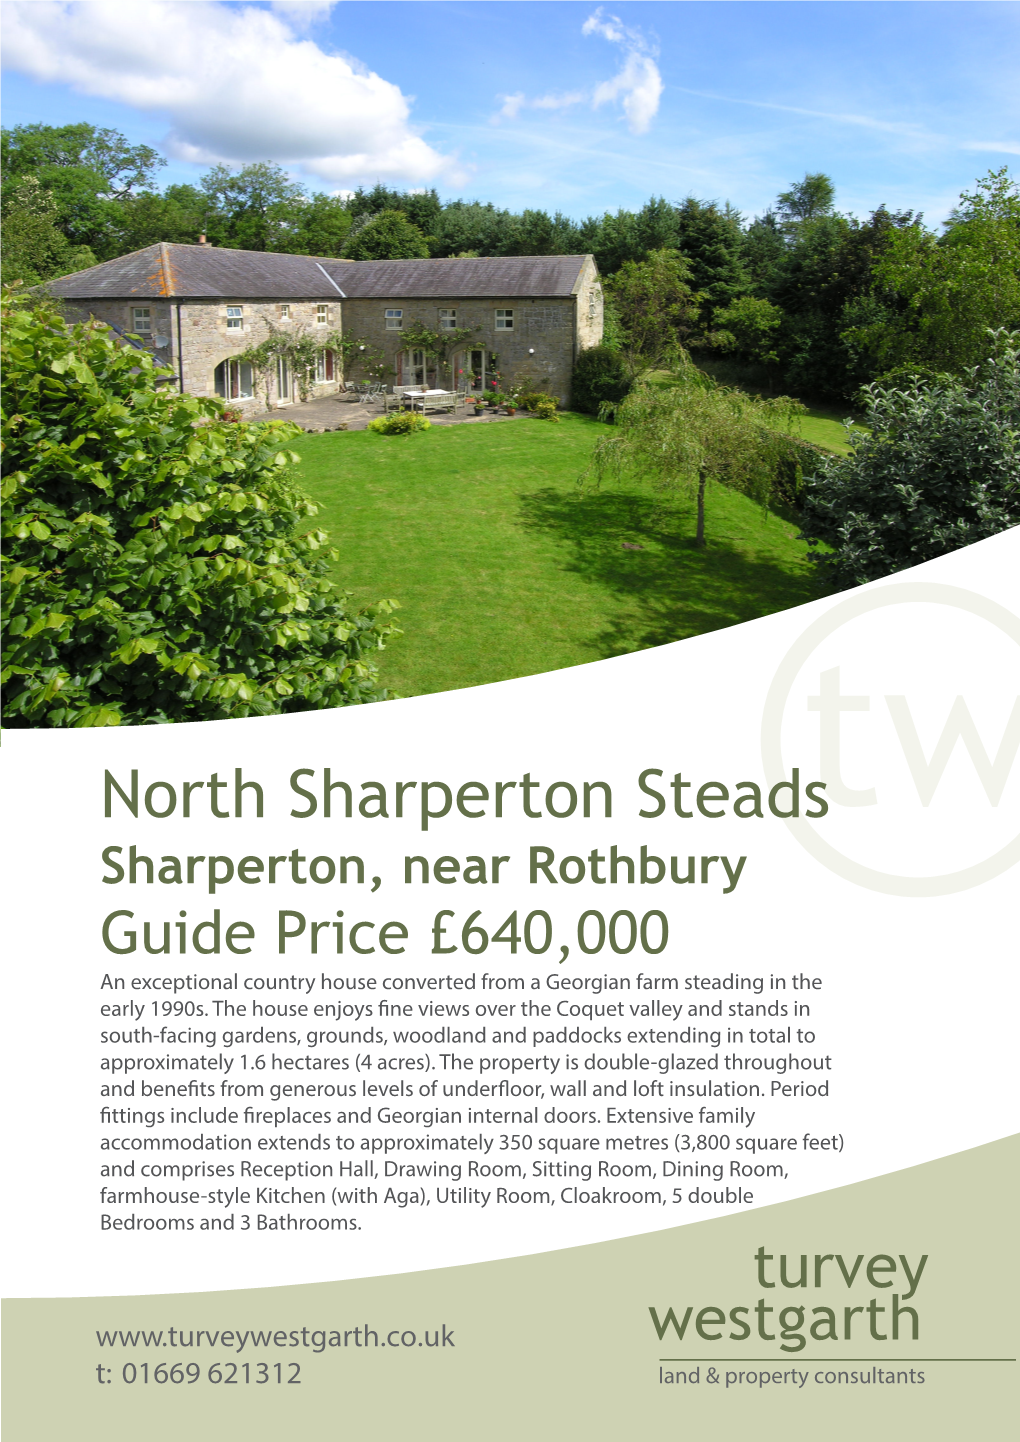 North Sharperton Steads Sharperton, Near Rothbury Guide Price £640,000 an Exceptional Country House Converted from a Georgian Farm Steading in the Early 1990S